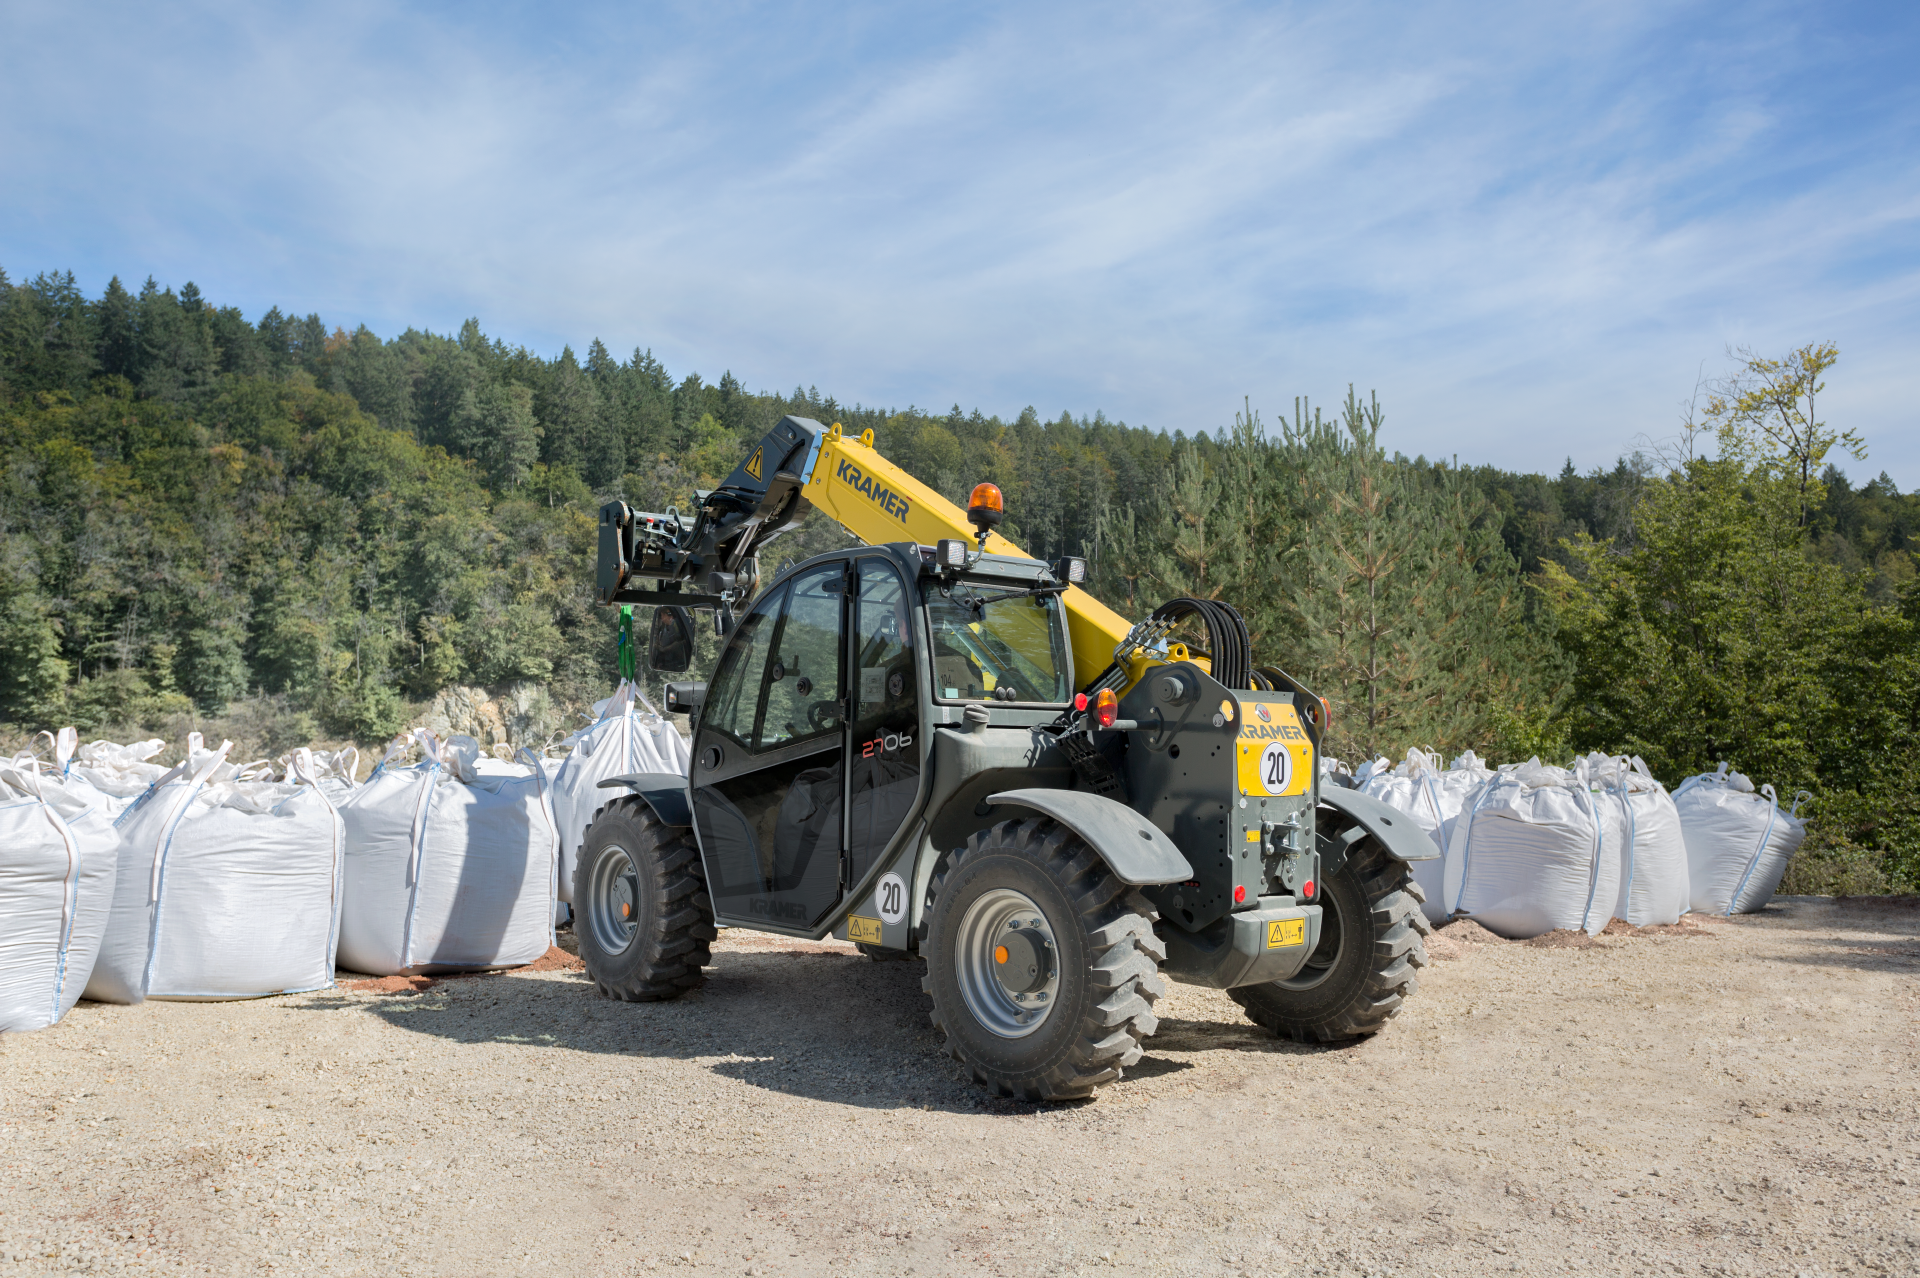 The efficient compact genius 2706 while loading big bags.